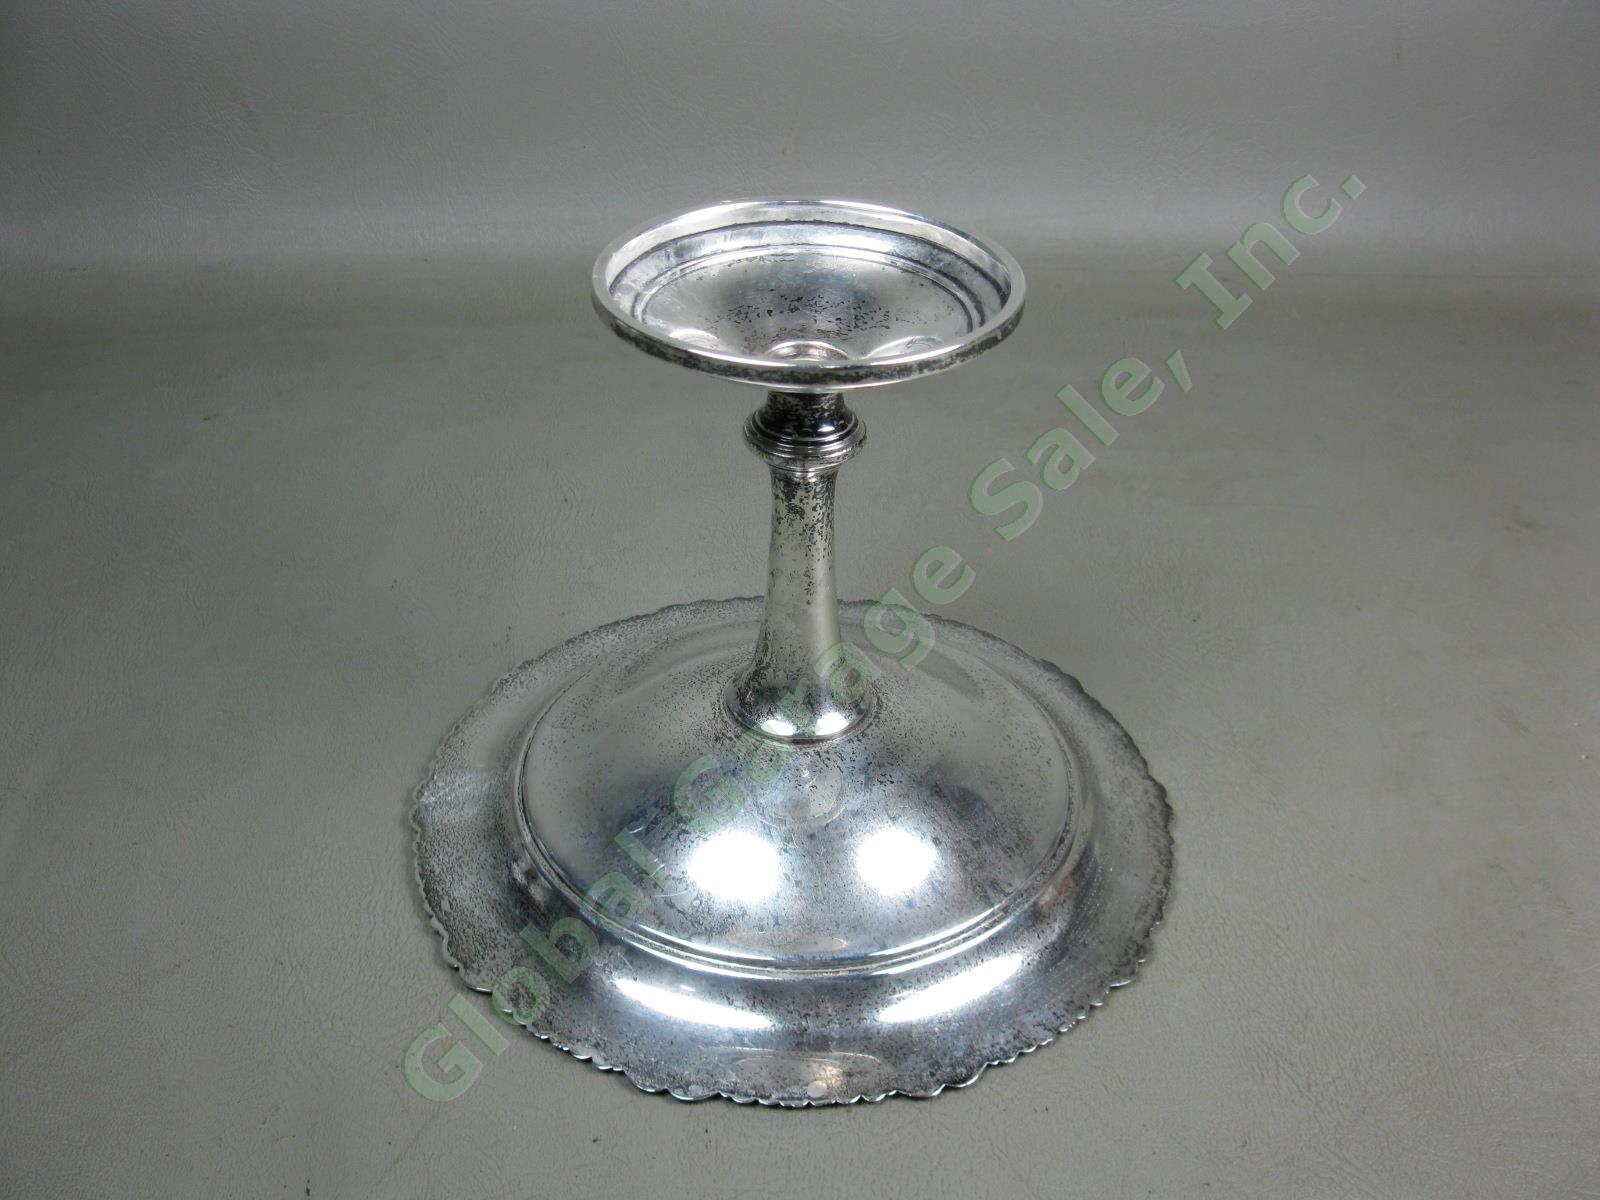 Mueck-Carey Gadroon Sterling Silver Pedestal Bon Candy Compote Dish Tazza 283.5g 2